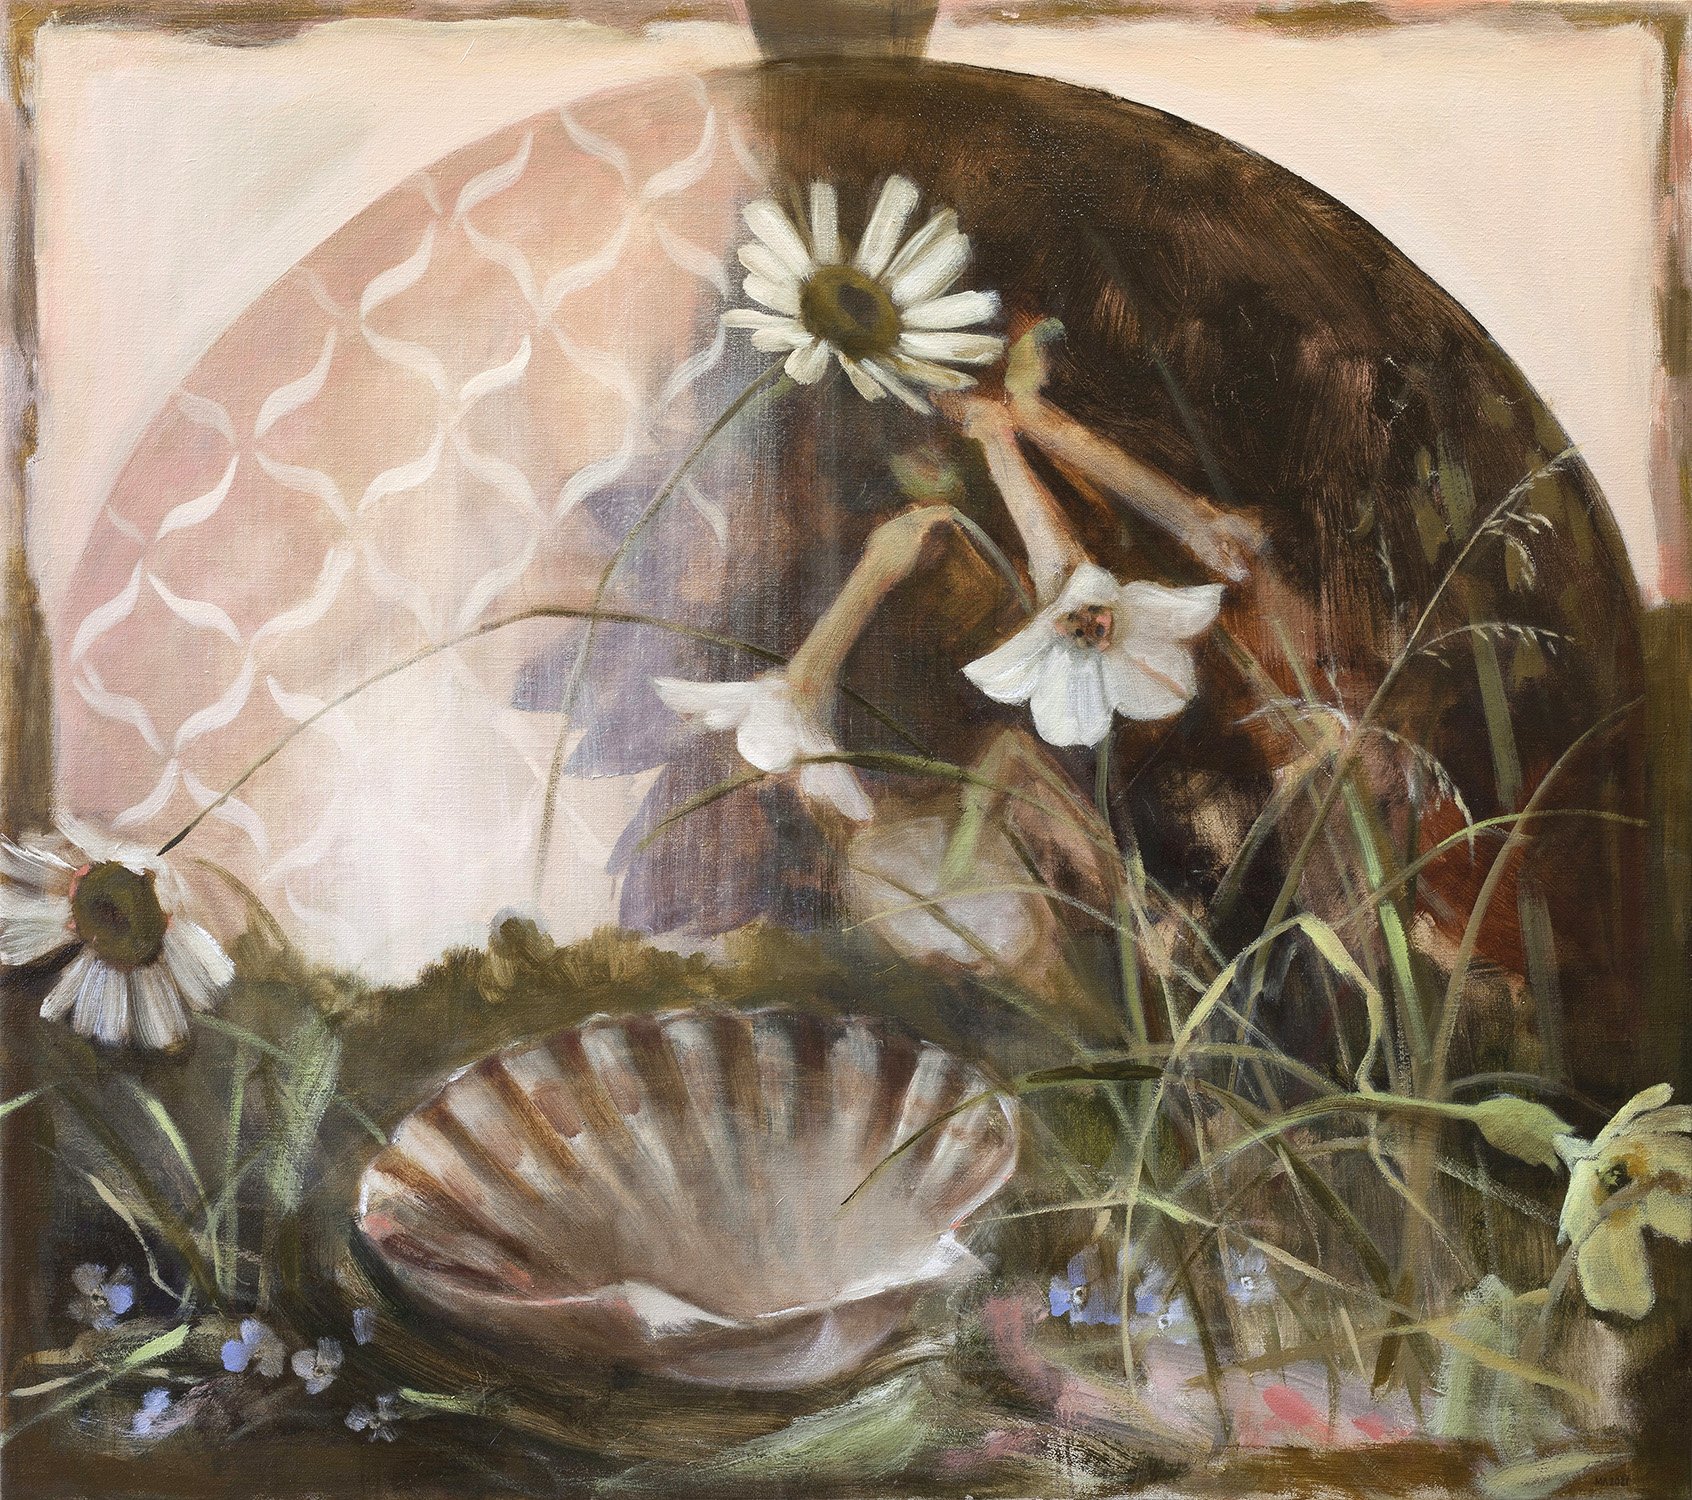   Of Small Things,  2021  oil on linen, 122 x 137cm 